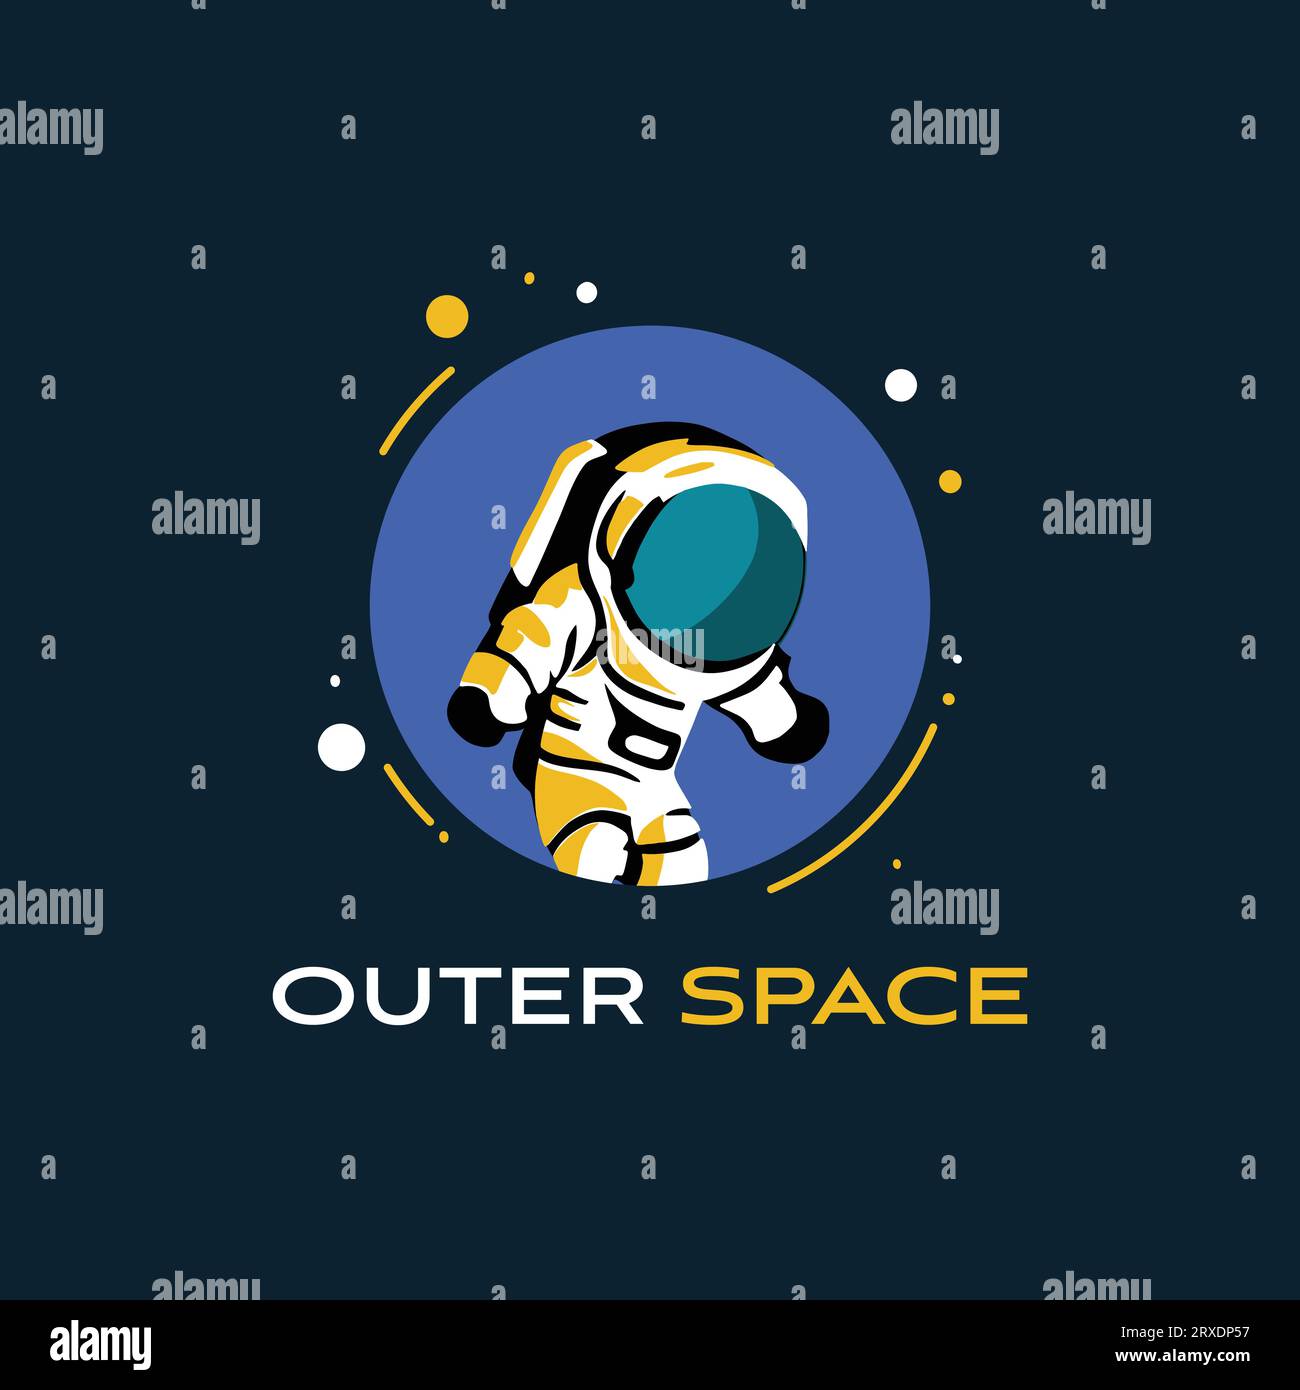 astronaut emblem logo in outer space isolated dark background Stock Vector